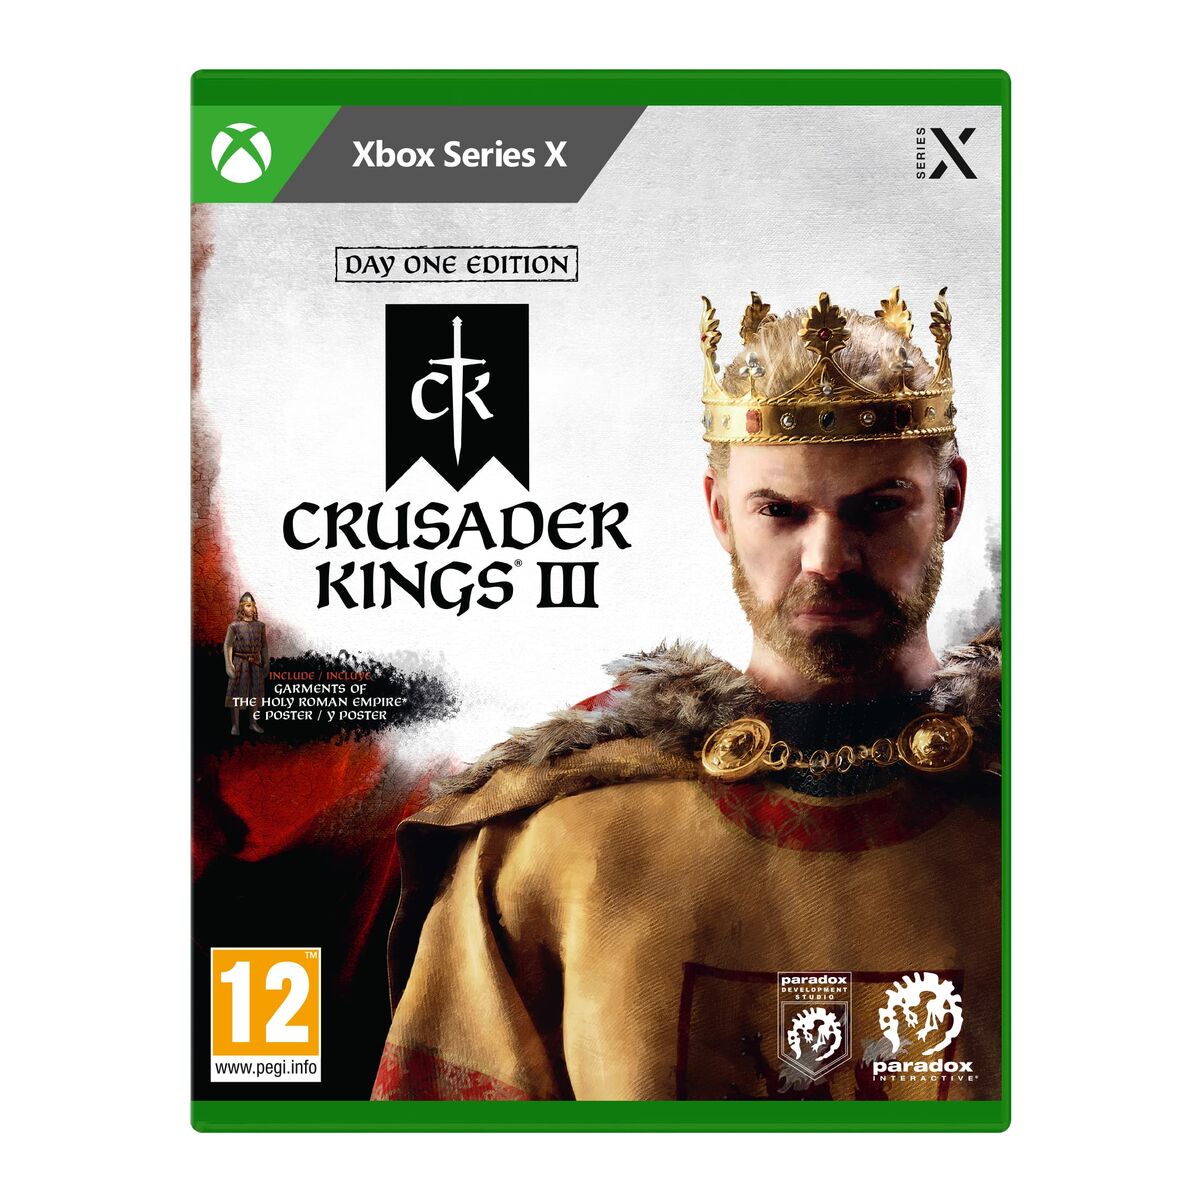 Xbox Series X Video Game KOCH MEDIA Crusader Kings III Console Edition (Day One Edition)